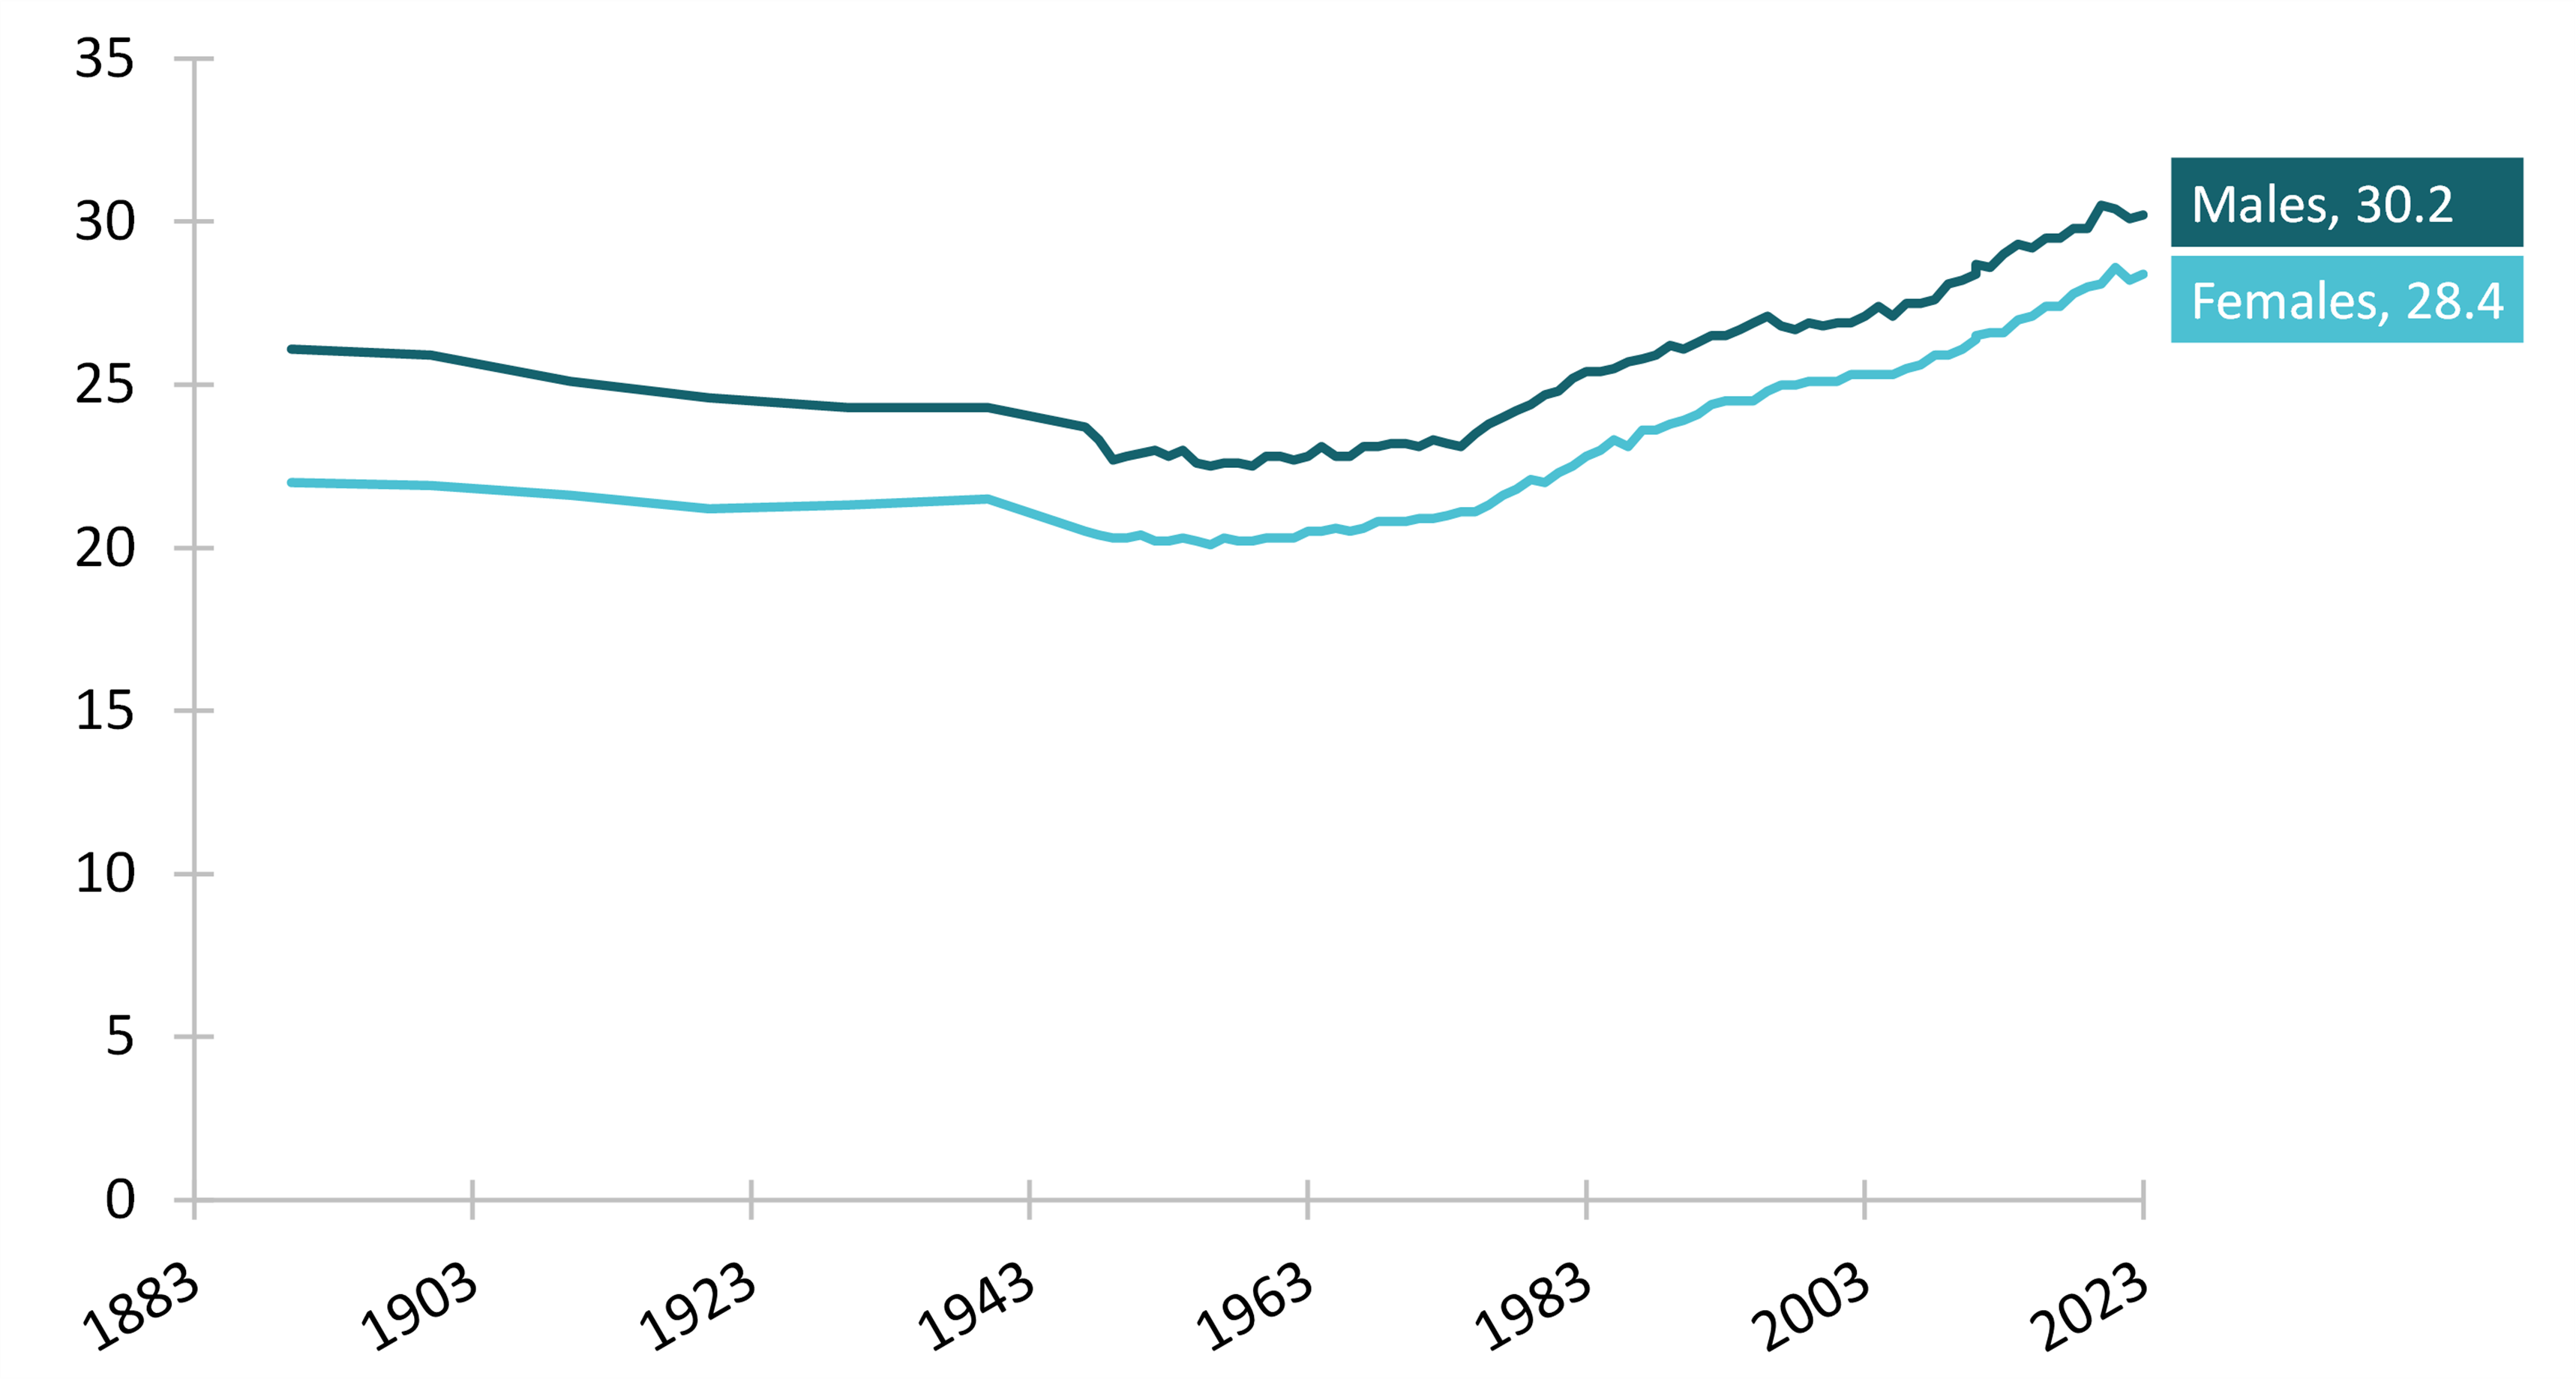 Figure 1. Median Age at First Marriage in the U.S., 1890-2023